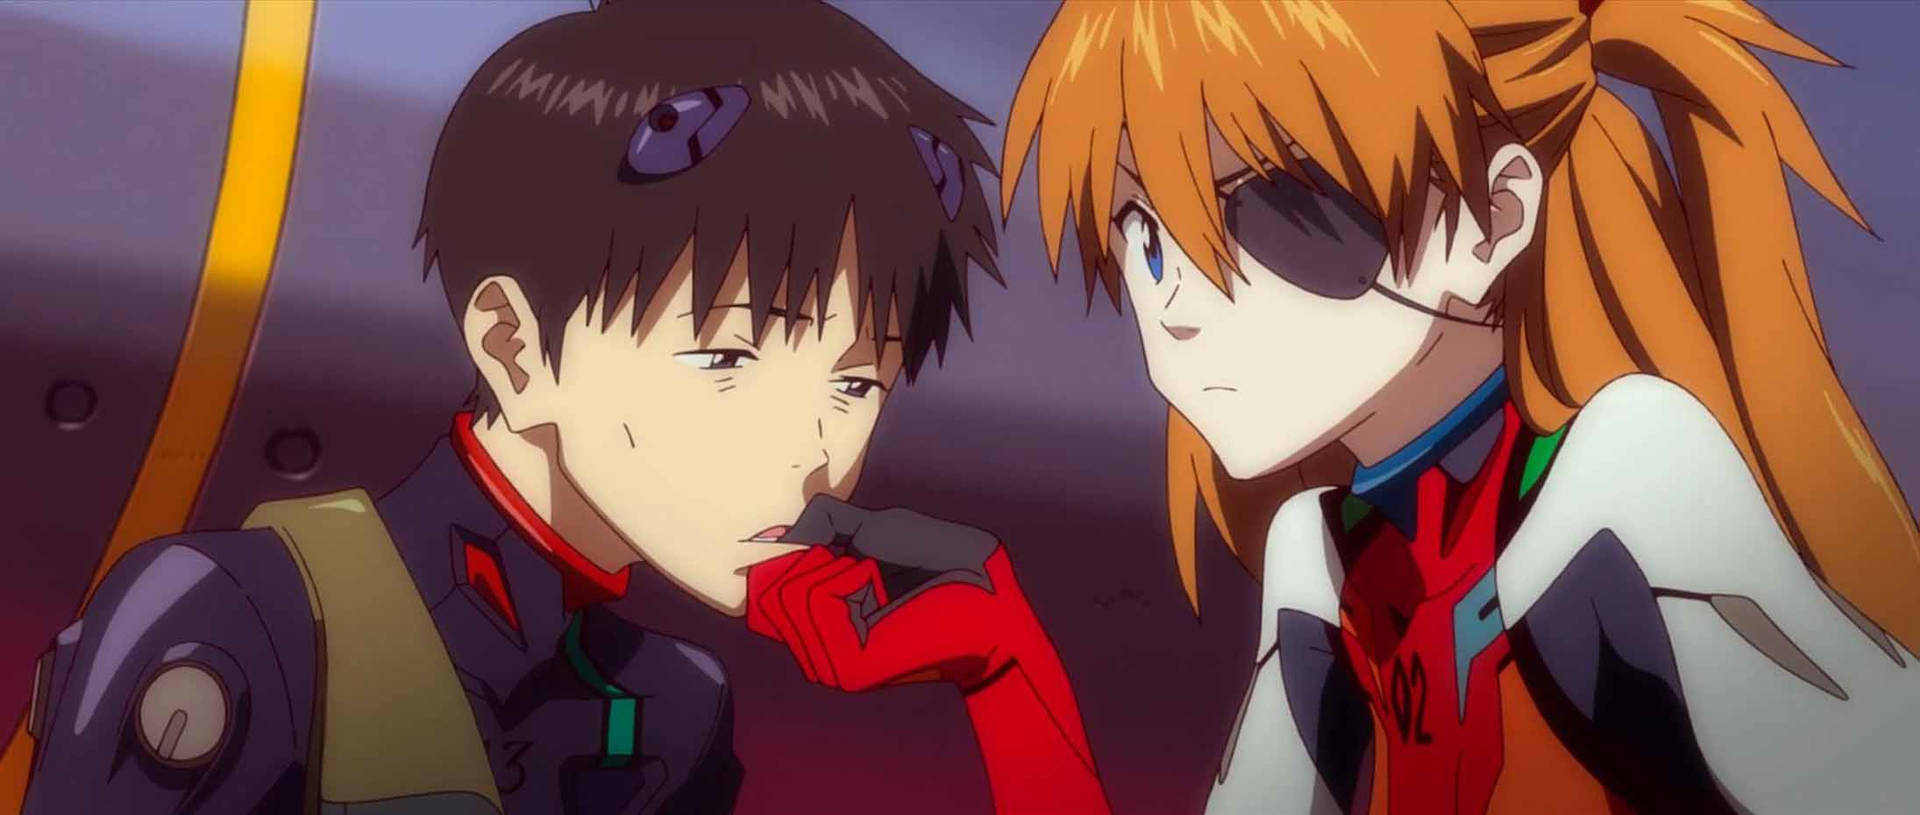 Evangelion 2190X930 Wallpaper and Background Image